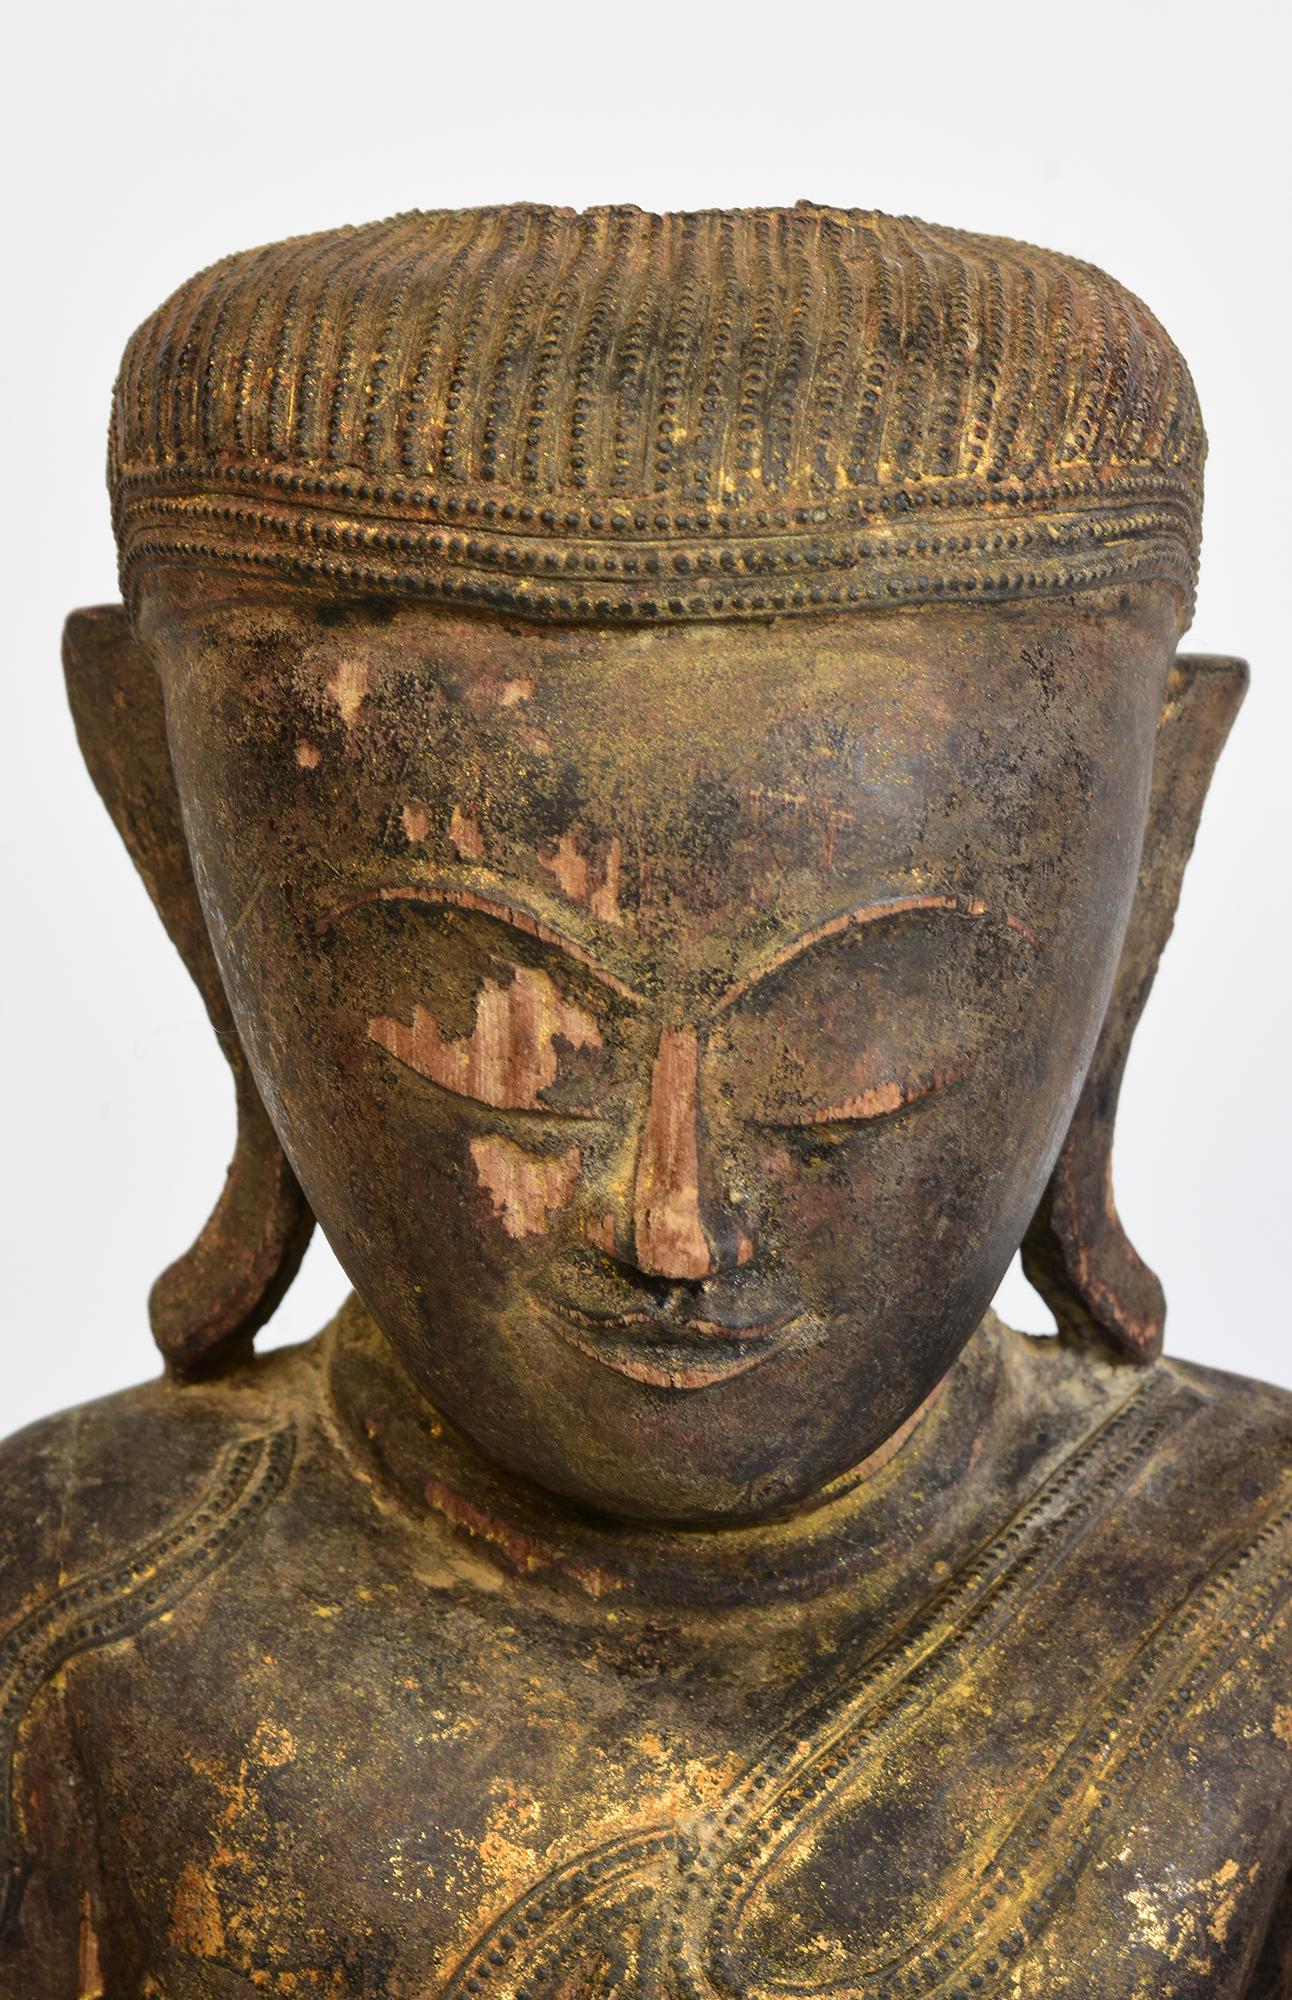 Antique Burmese wooden Buddha sitting in Mara Vijaya (calling the earth to witness) posture on a base.

Age: Burma, Shan Period, 17th - 18th Century
Size: Height 52 C.M. / Width 27.7 C.M. / Depth 11 C.M.
Condition: Nice condition overall (some